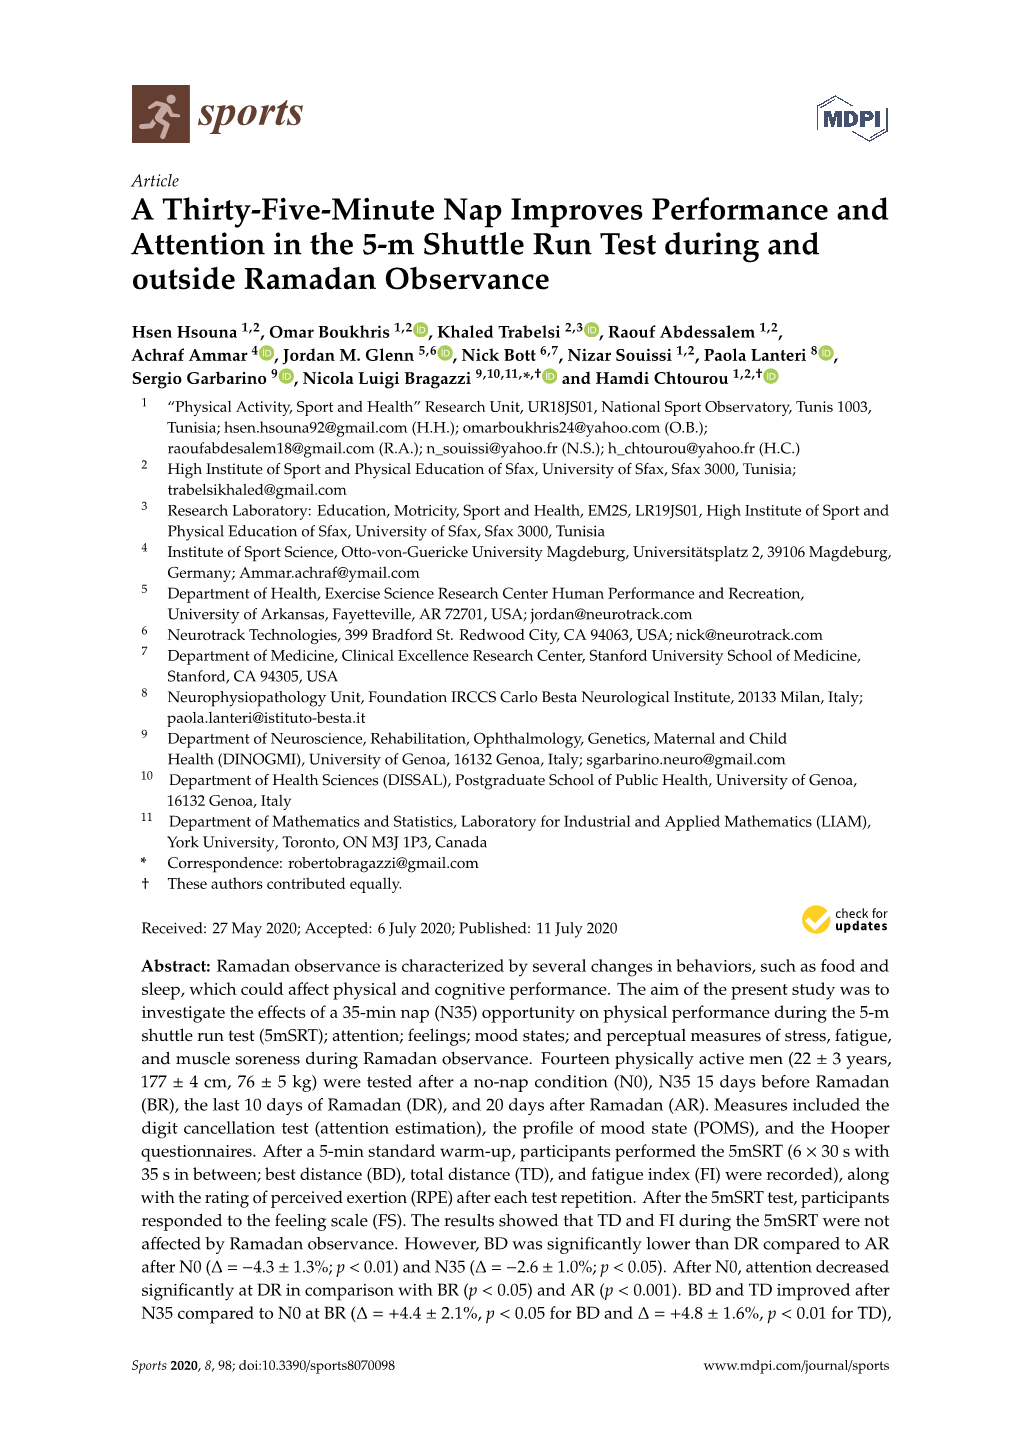 A Thirty-Five-Minute Nap Improves Performance and Attention in the 5-M Shuttle Run Test During and Outside Ramadan Observance